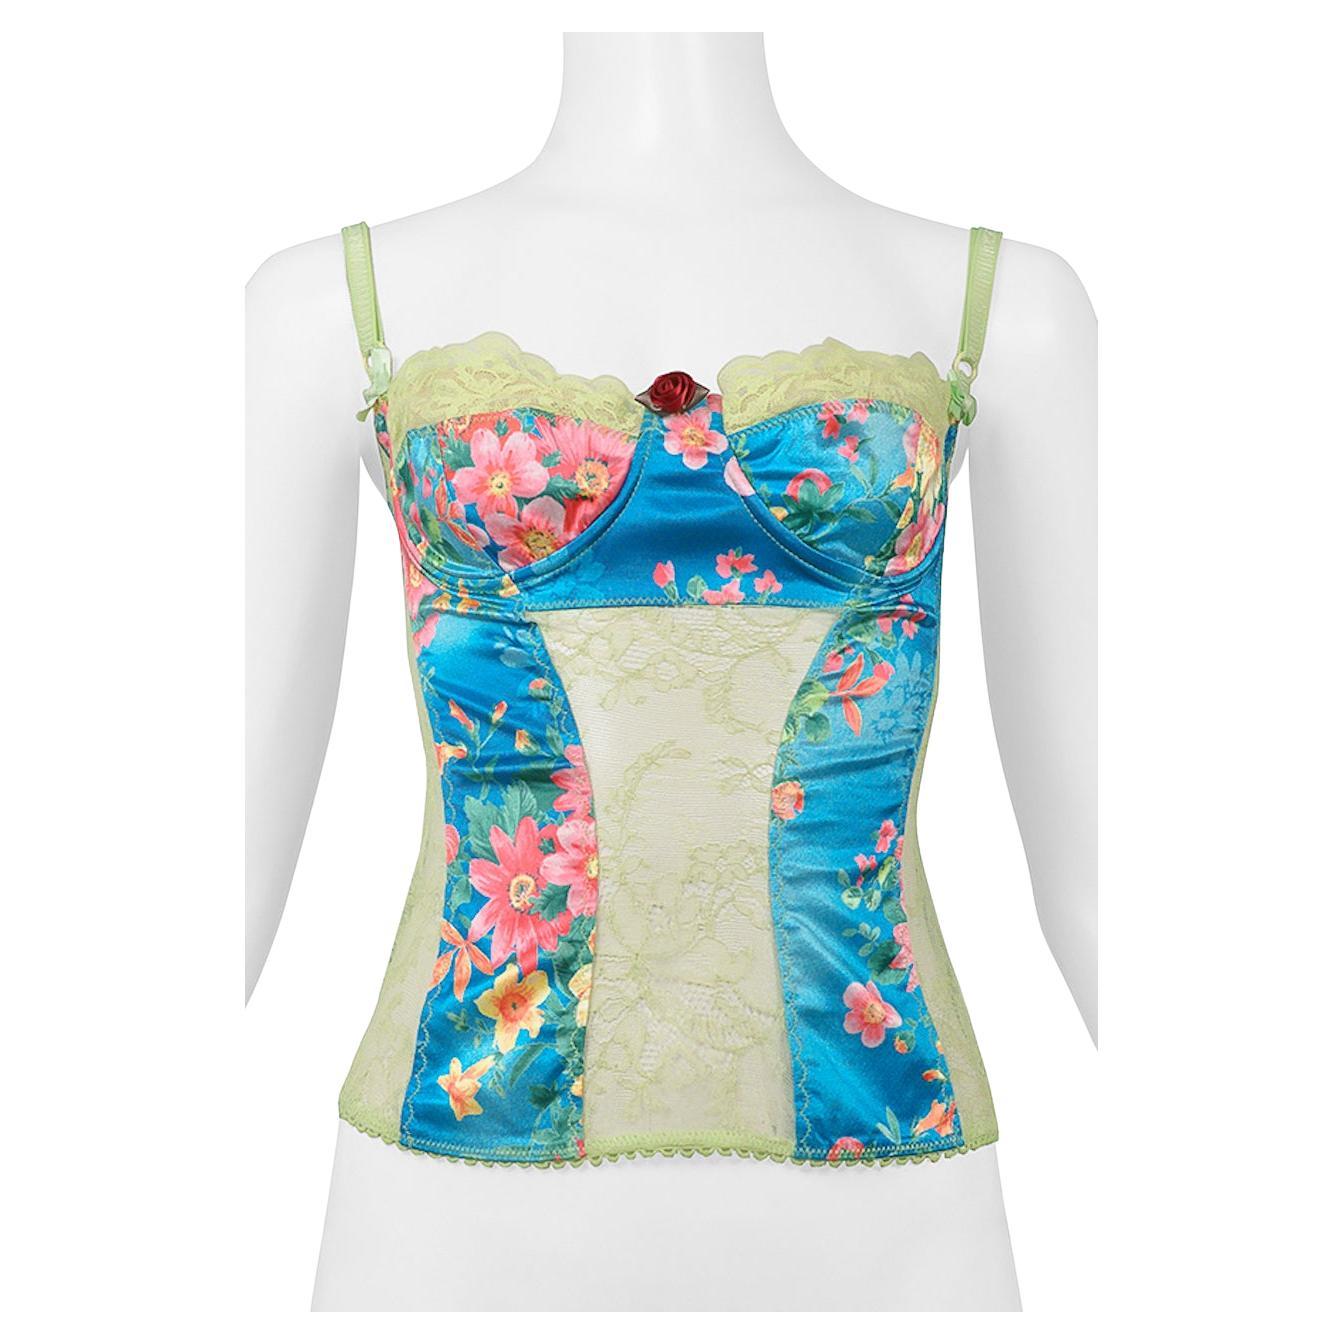 Dolce & Gabbana Blue Floral & Green Lace Camisole Top 2005 For Sale